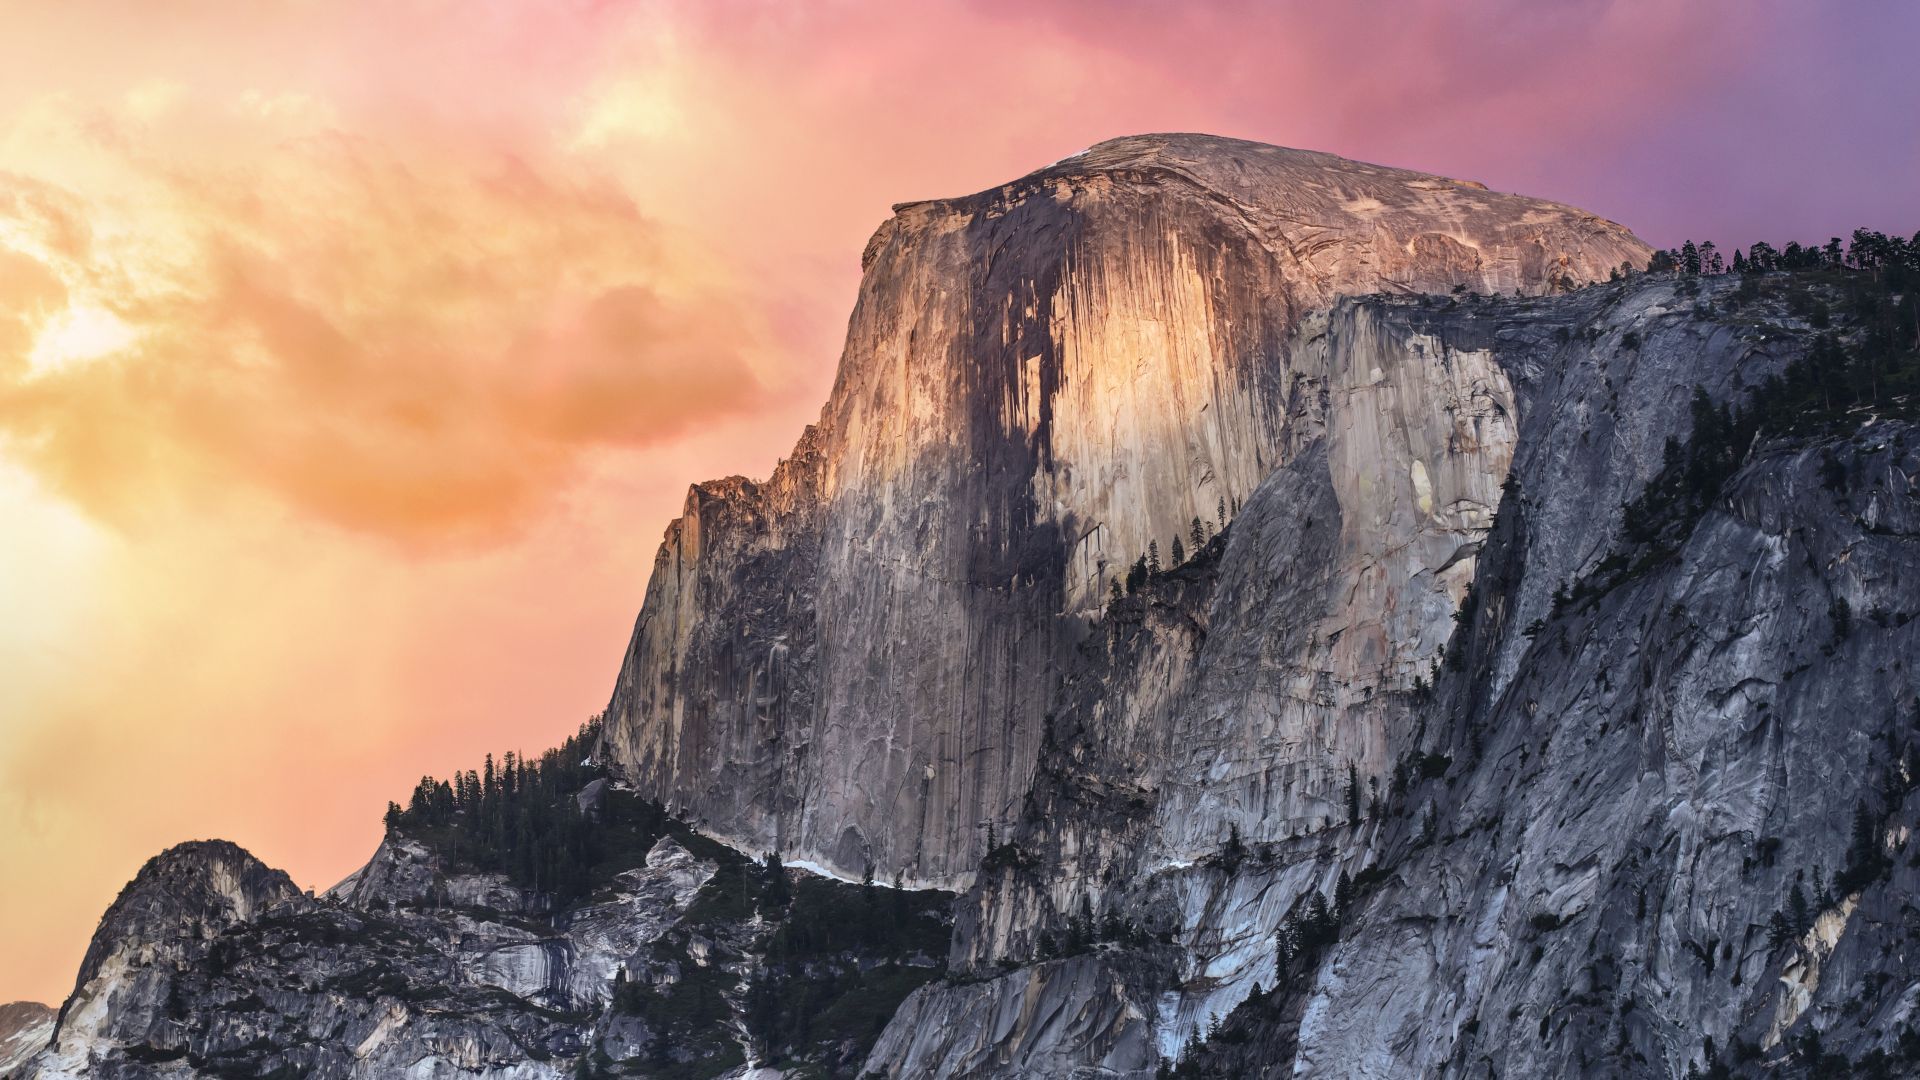 Desktop wallpaper half dome, yosemite valley, national park, mountains, HD image, picture, background, 31195f